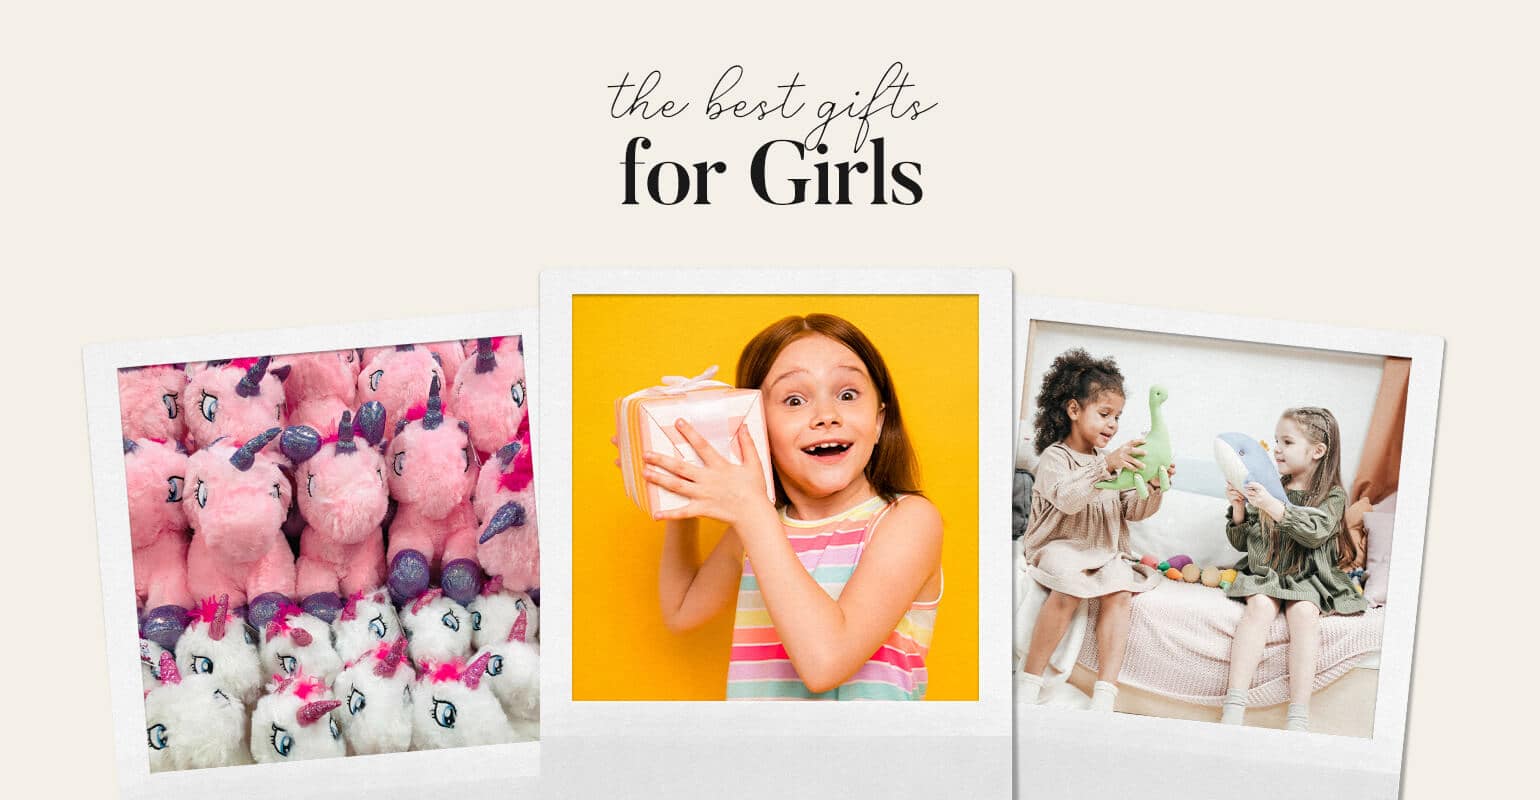 16 Sweet, Smart, and Creative Gifts for Girls